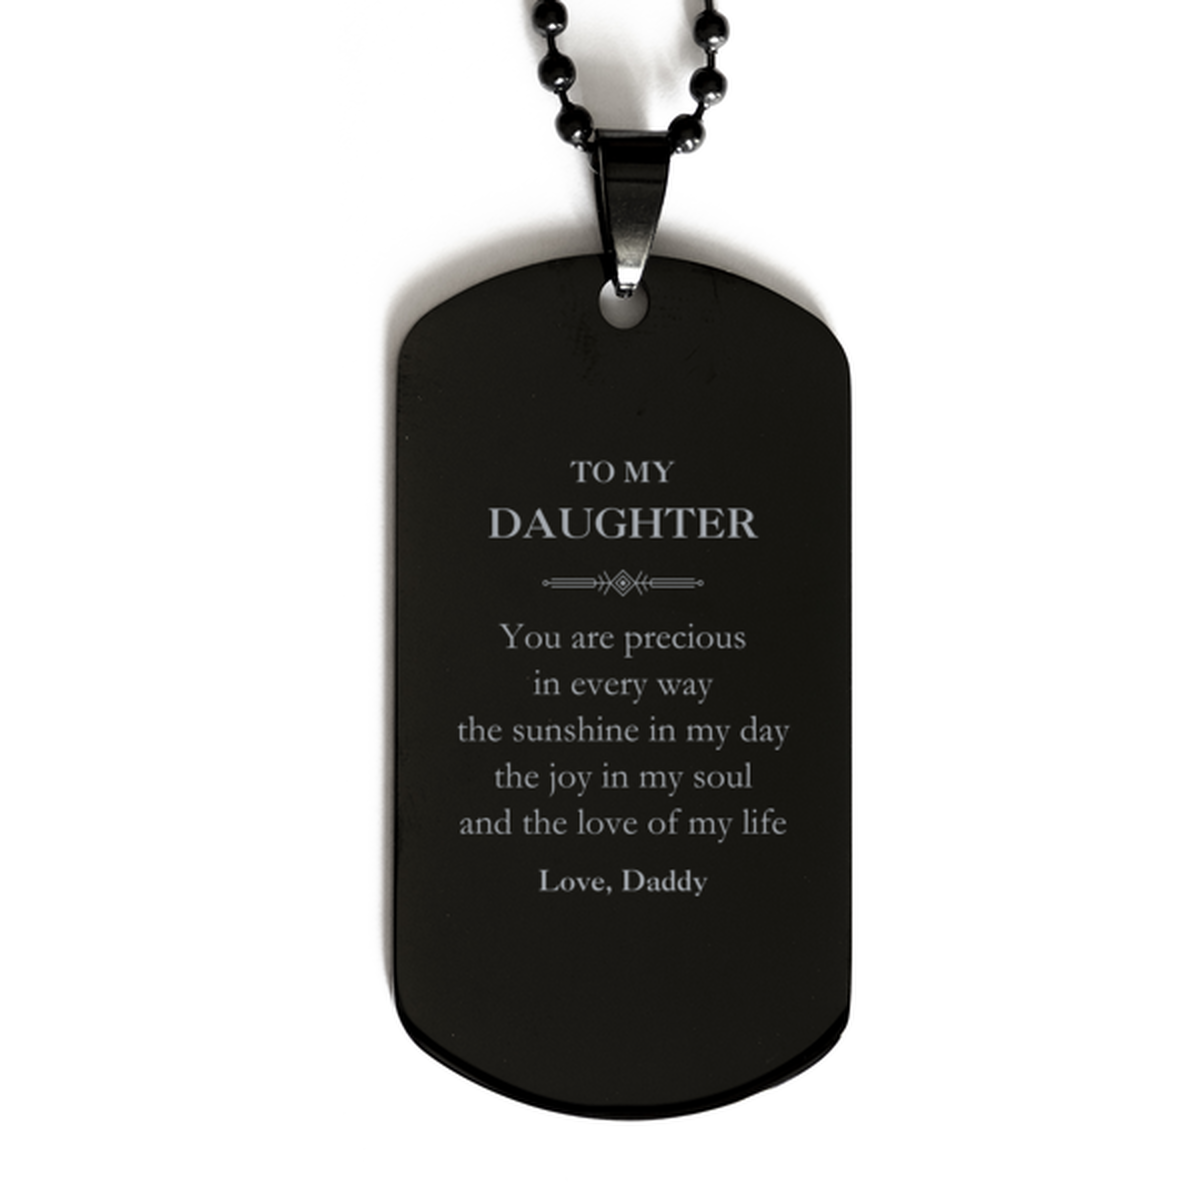 Graduation Gifts for Daughter Black Dog Tag Present from Daddy, Christmas Daughter Birthday Gifts Daughter You are precious in every way the sunshine in my day. Love, Daddy